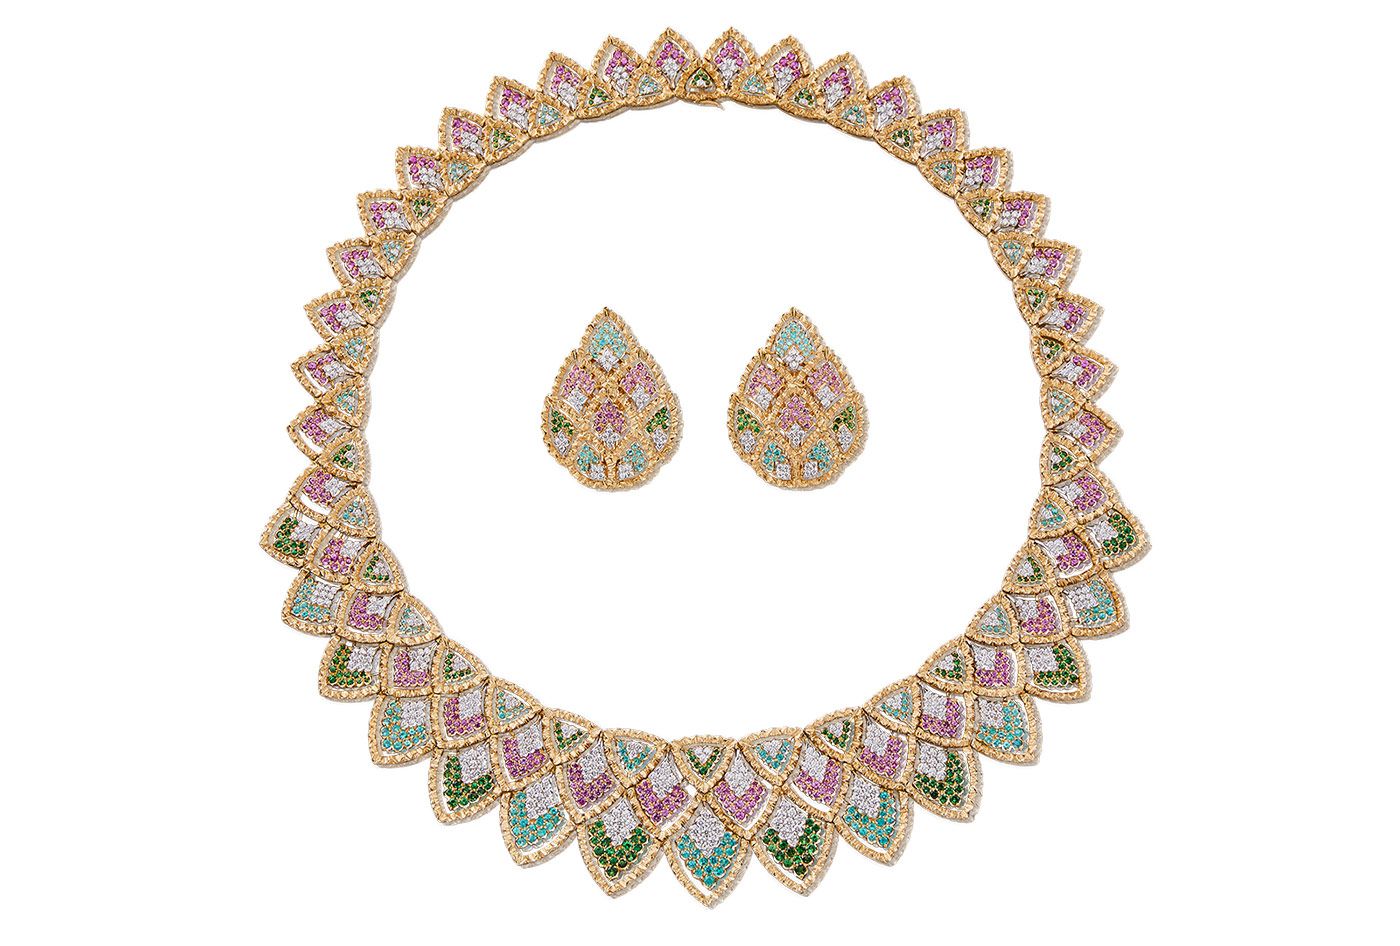 Buccellati Sadar necklace and matching earrings with diamonds, tourmalines, tsavorite garnets and sapphires from the Il Giardino di Buccellati High Jewellery collection